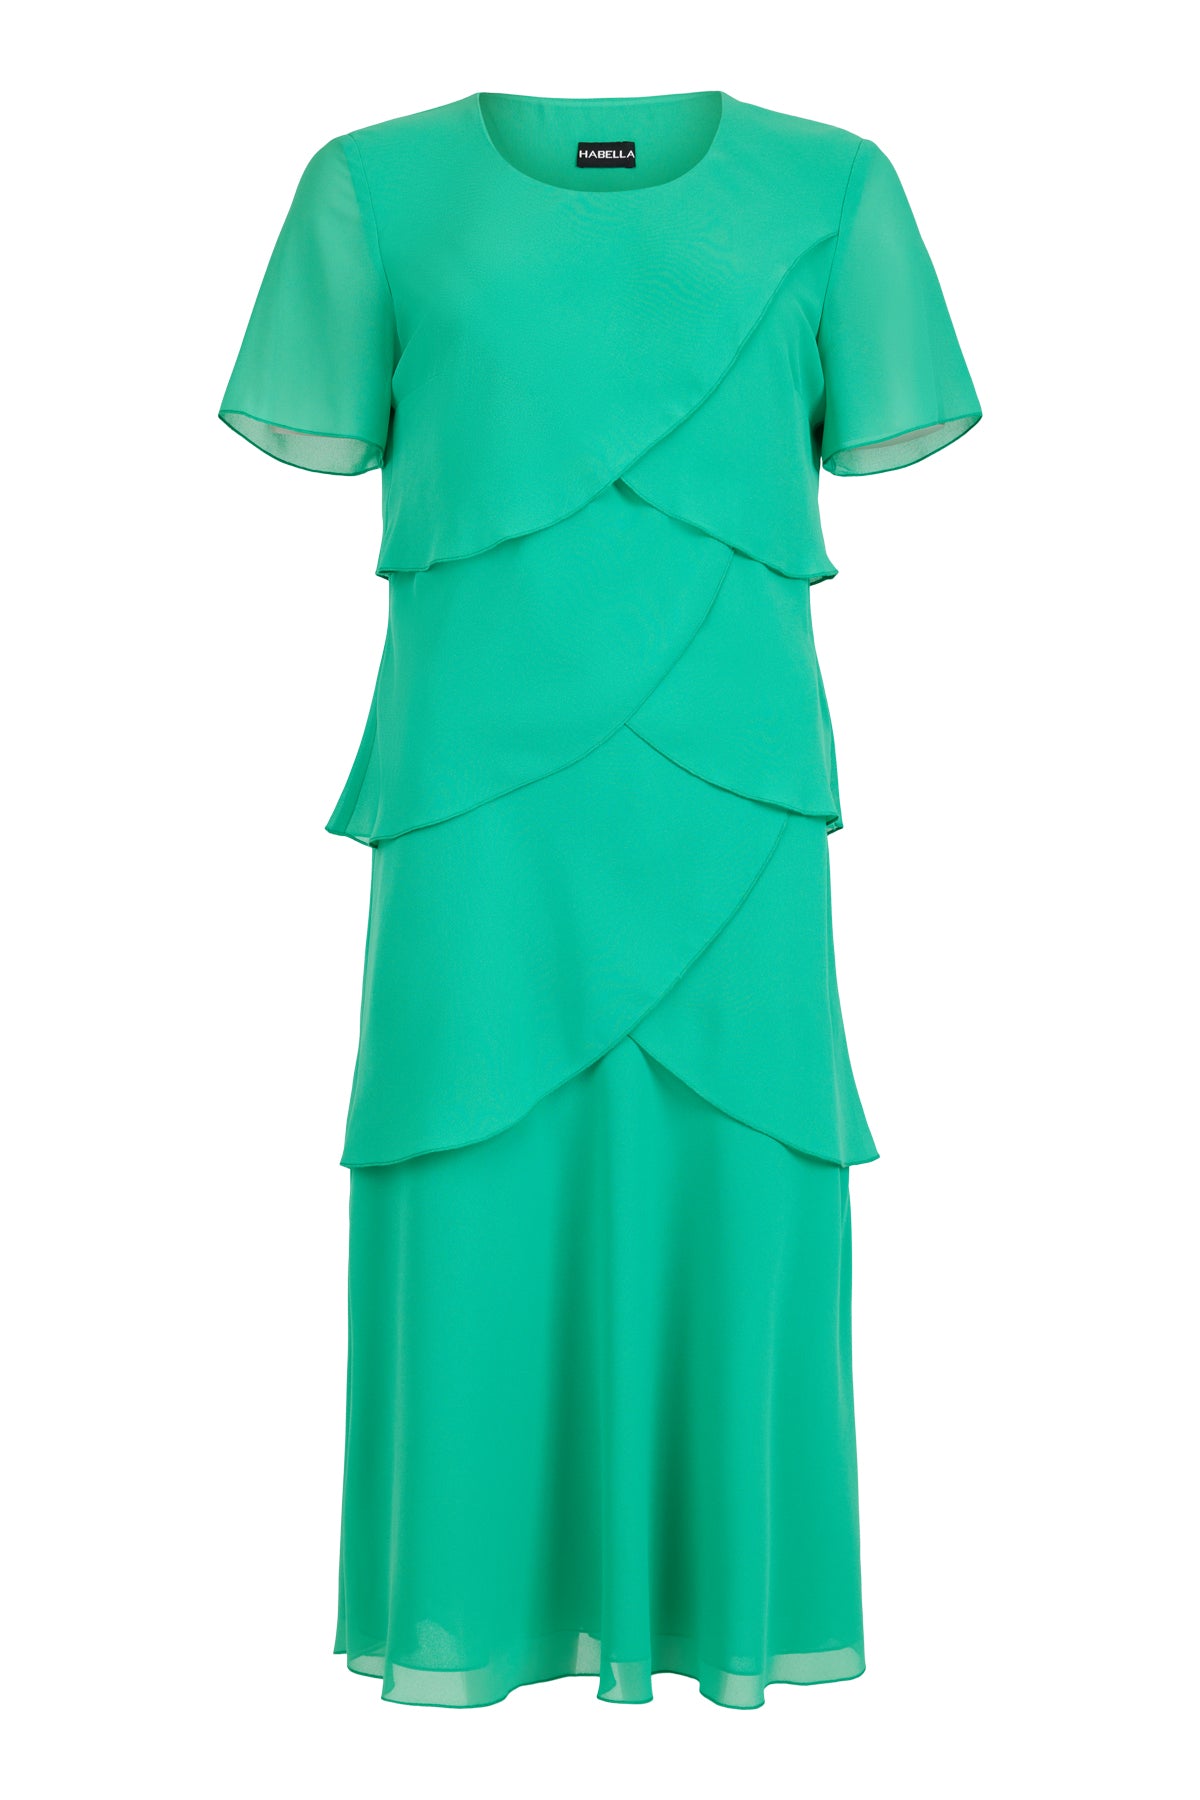 Green Round Neck Dress With Frill Effect & Short Sleeves